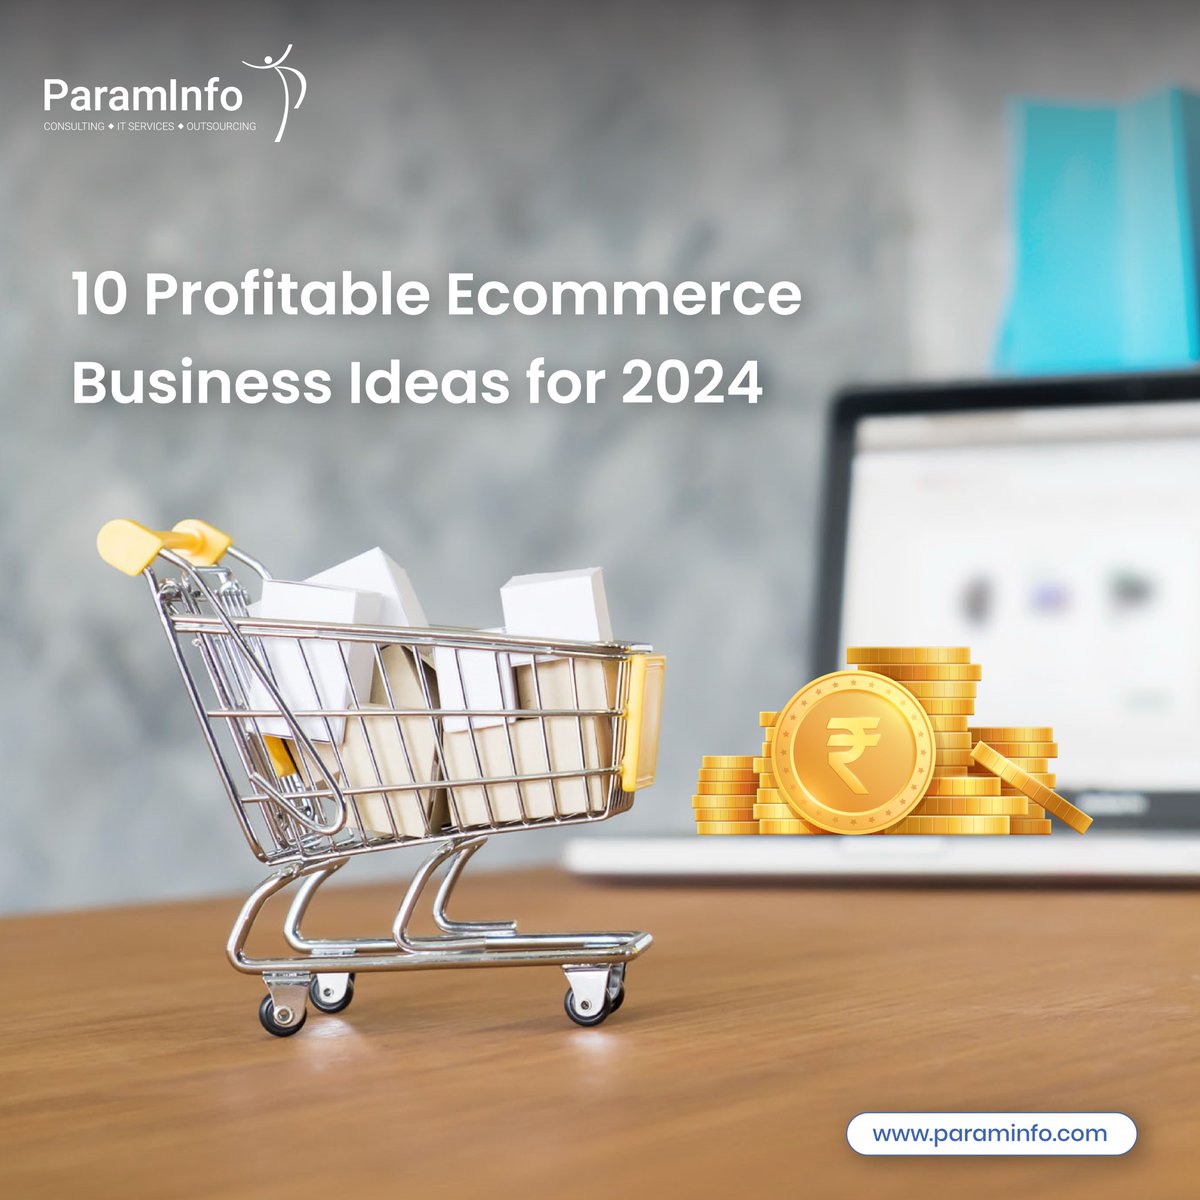 A 2023 Statista Survey shows that online shopping is booming in the USA, with 43% purchasing clothes, 33% buying shoes & 26% ordering food & beverages online.

Read our Blog: bit.ly/3Jgc1xl 👈

#ecommerce #futureofretail #ecommercesolutions #softwareservices #paraminfo